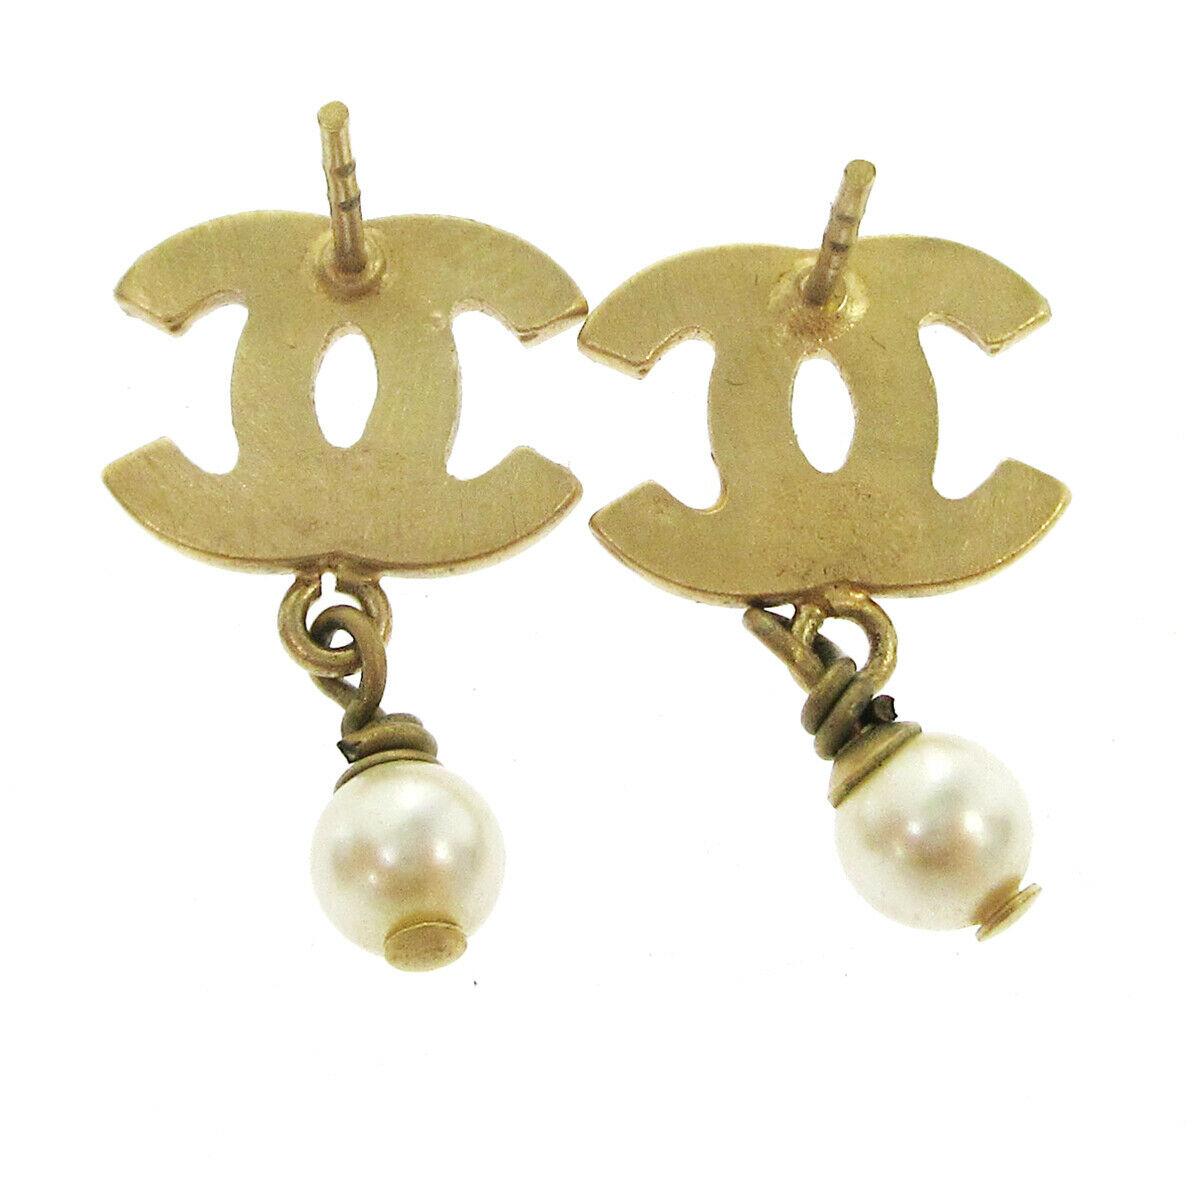 Chanel Gold Pearl Charm CC Small Pierced Evening Dangle Drop Earrings

Faux Pearl
Metal
Gold tone hardware
For Pierced Ears
Made in Italy
Measures 0.50